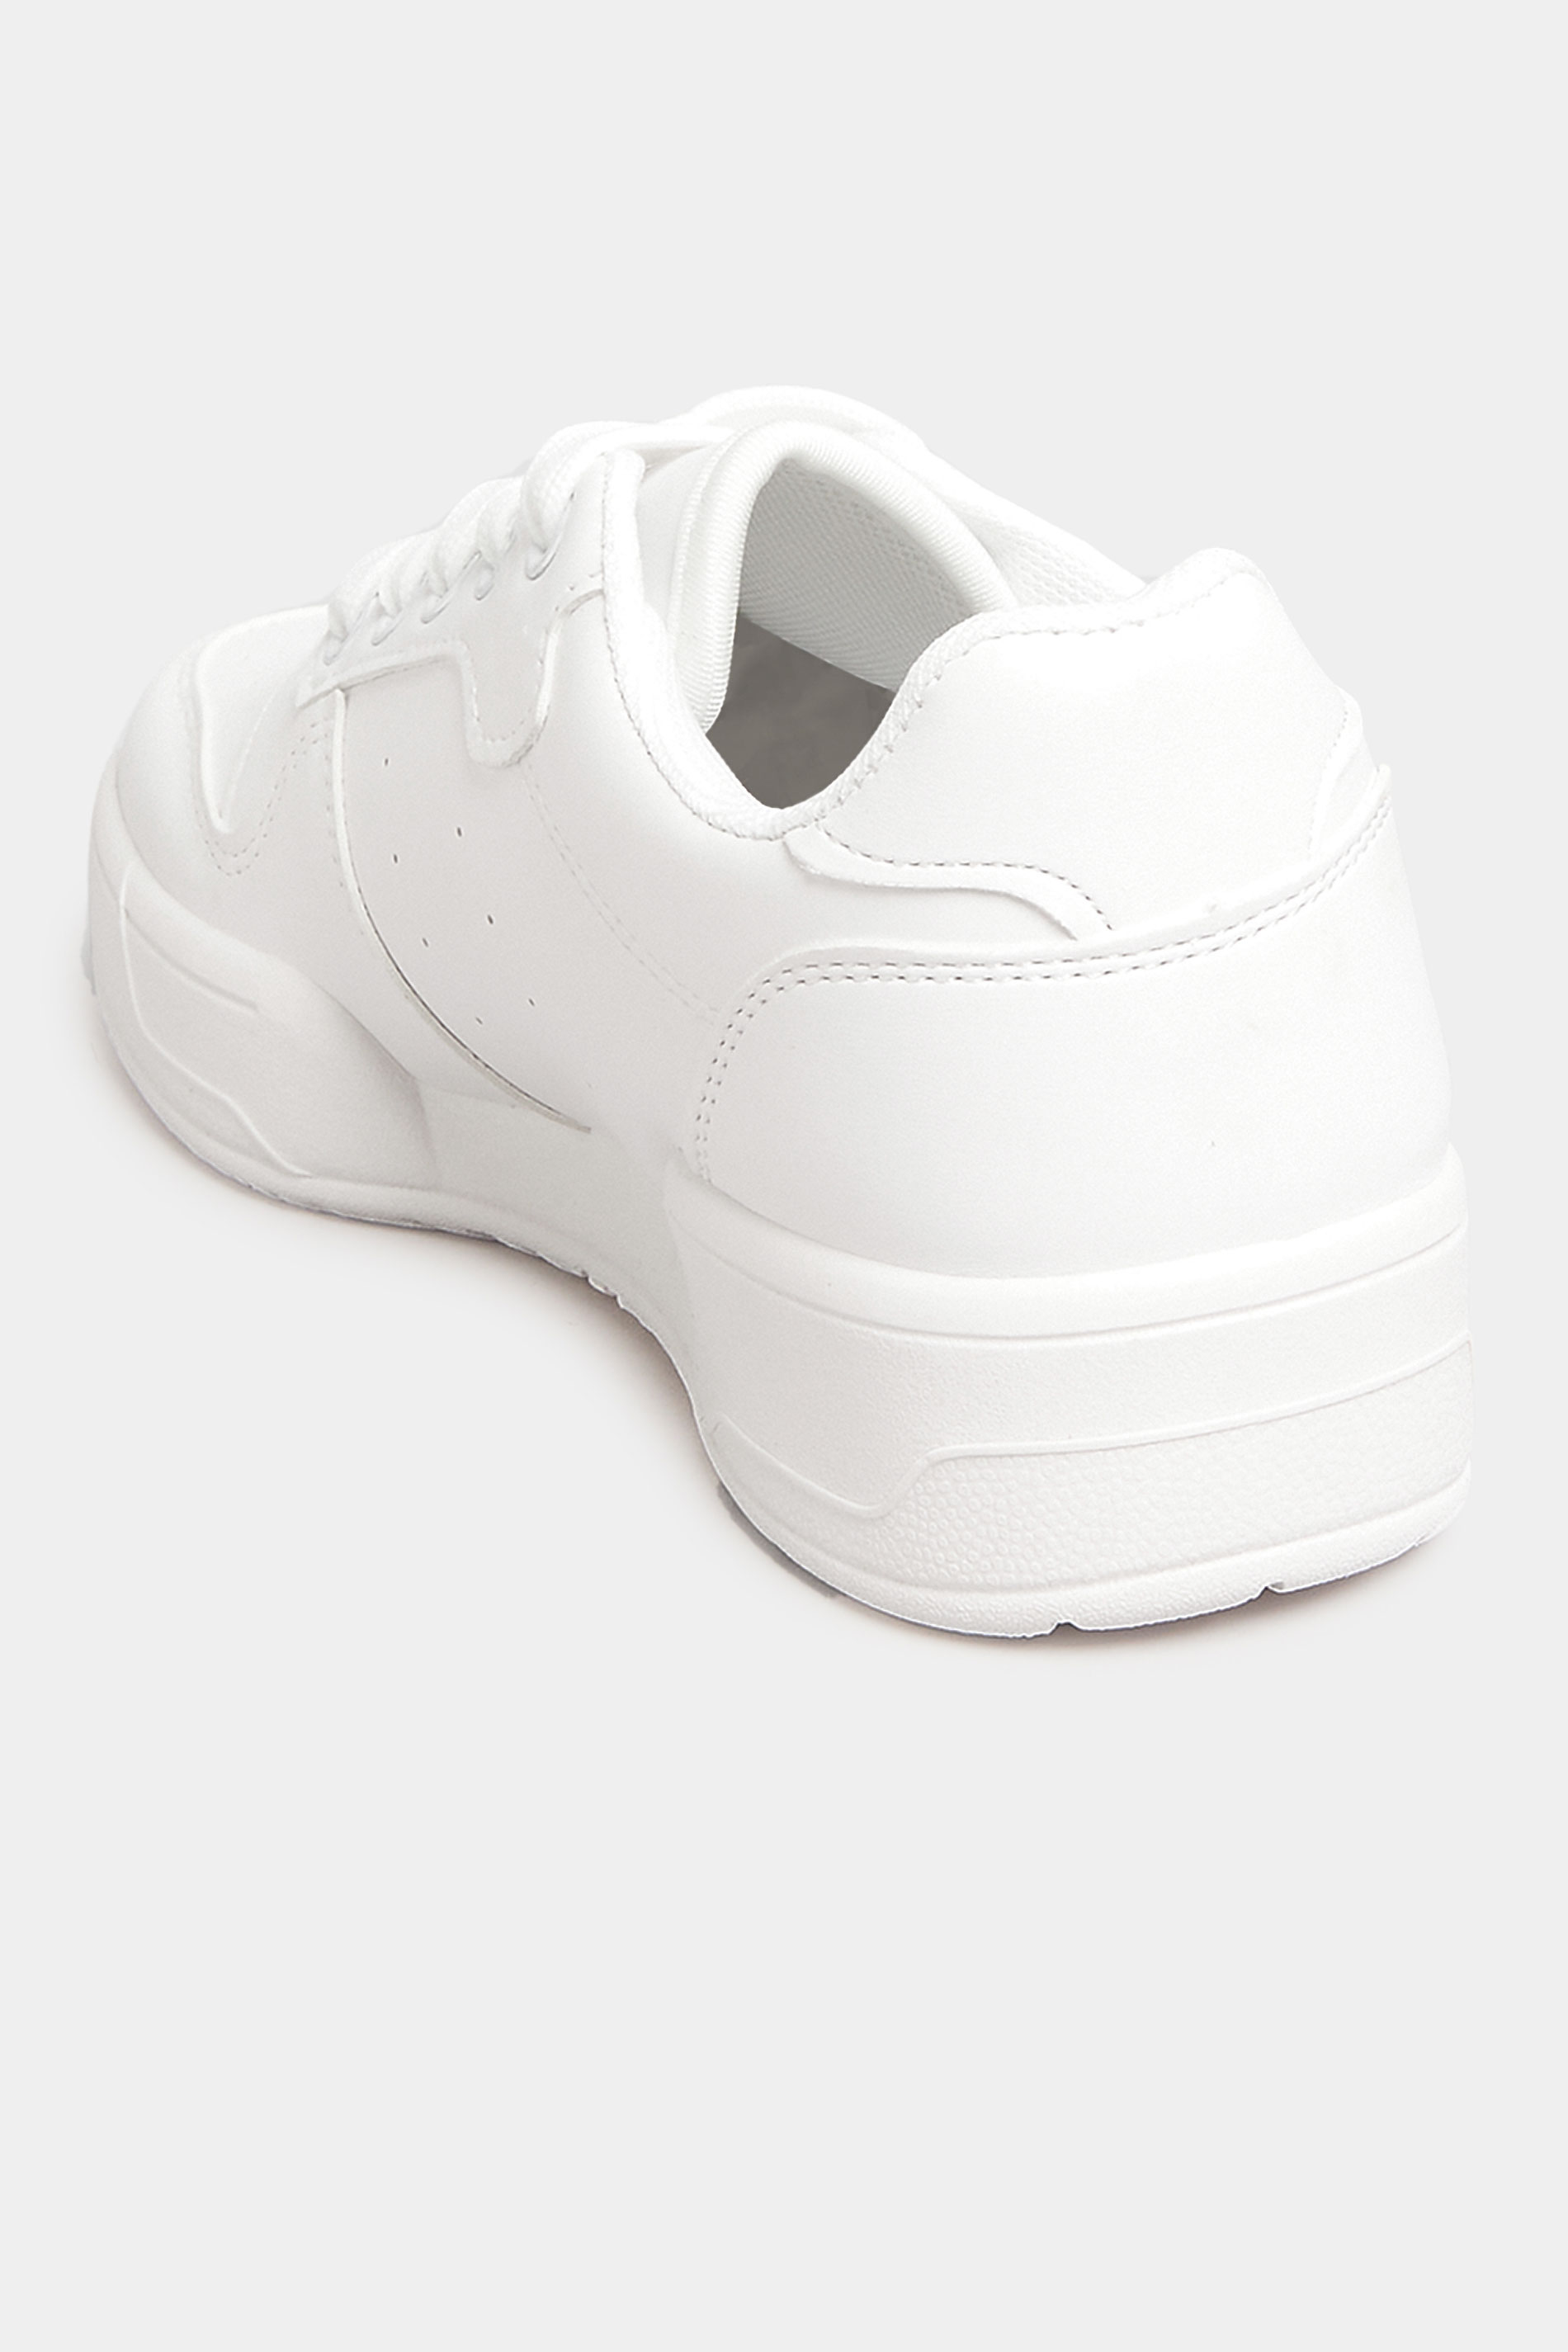 Grande taille  Shoes Grande taille  Flat Shoes | PixieGirl White Lace Up Trainers In Standard D Fit - EG40120